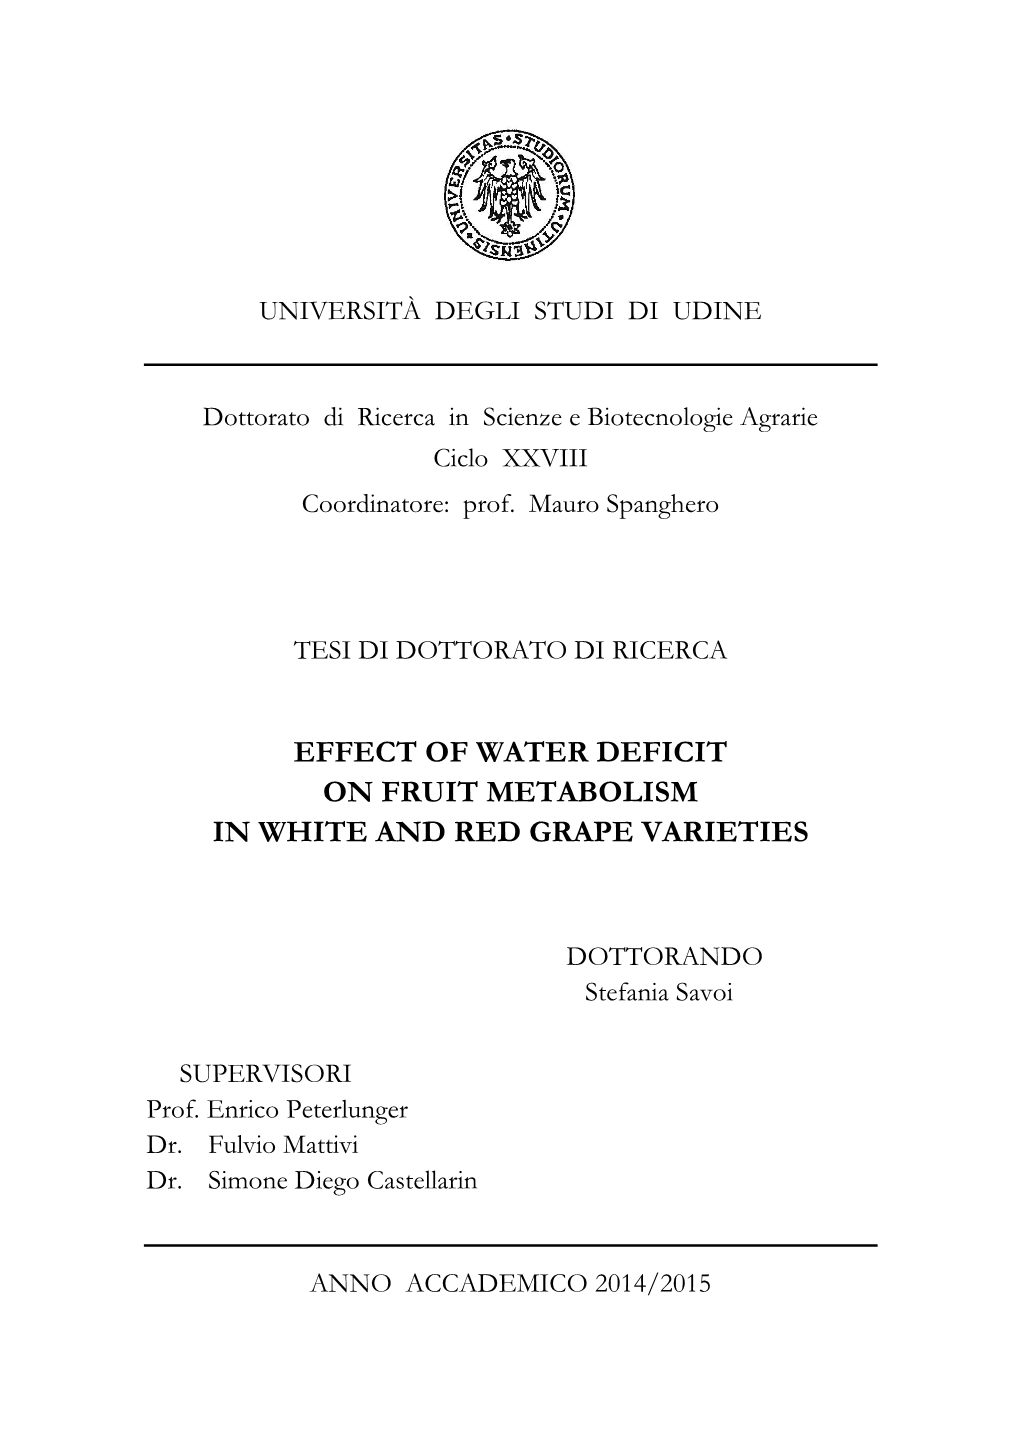 Effect of Water Deficit on Fruit Metabolism in White and Red Grape Varieties